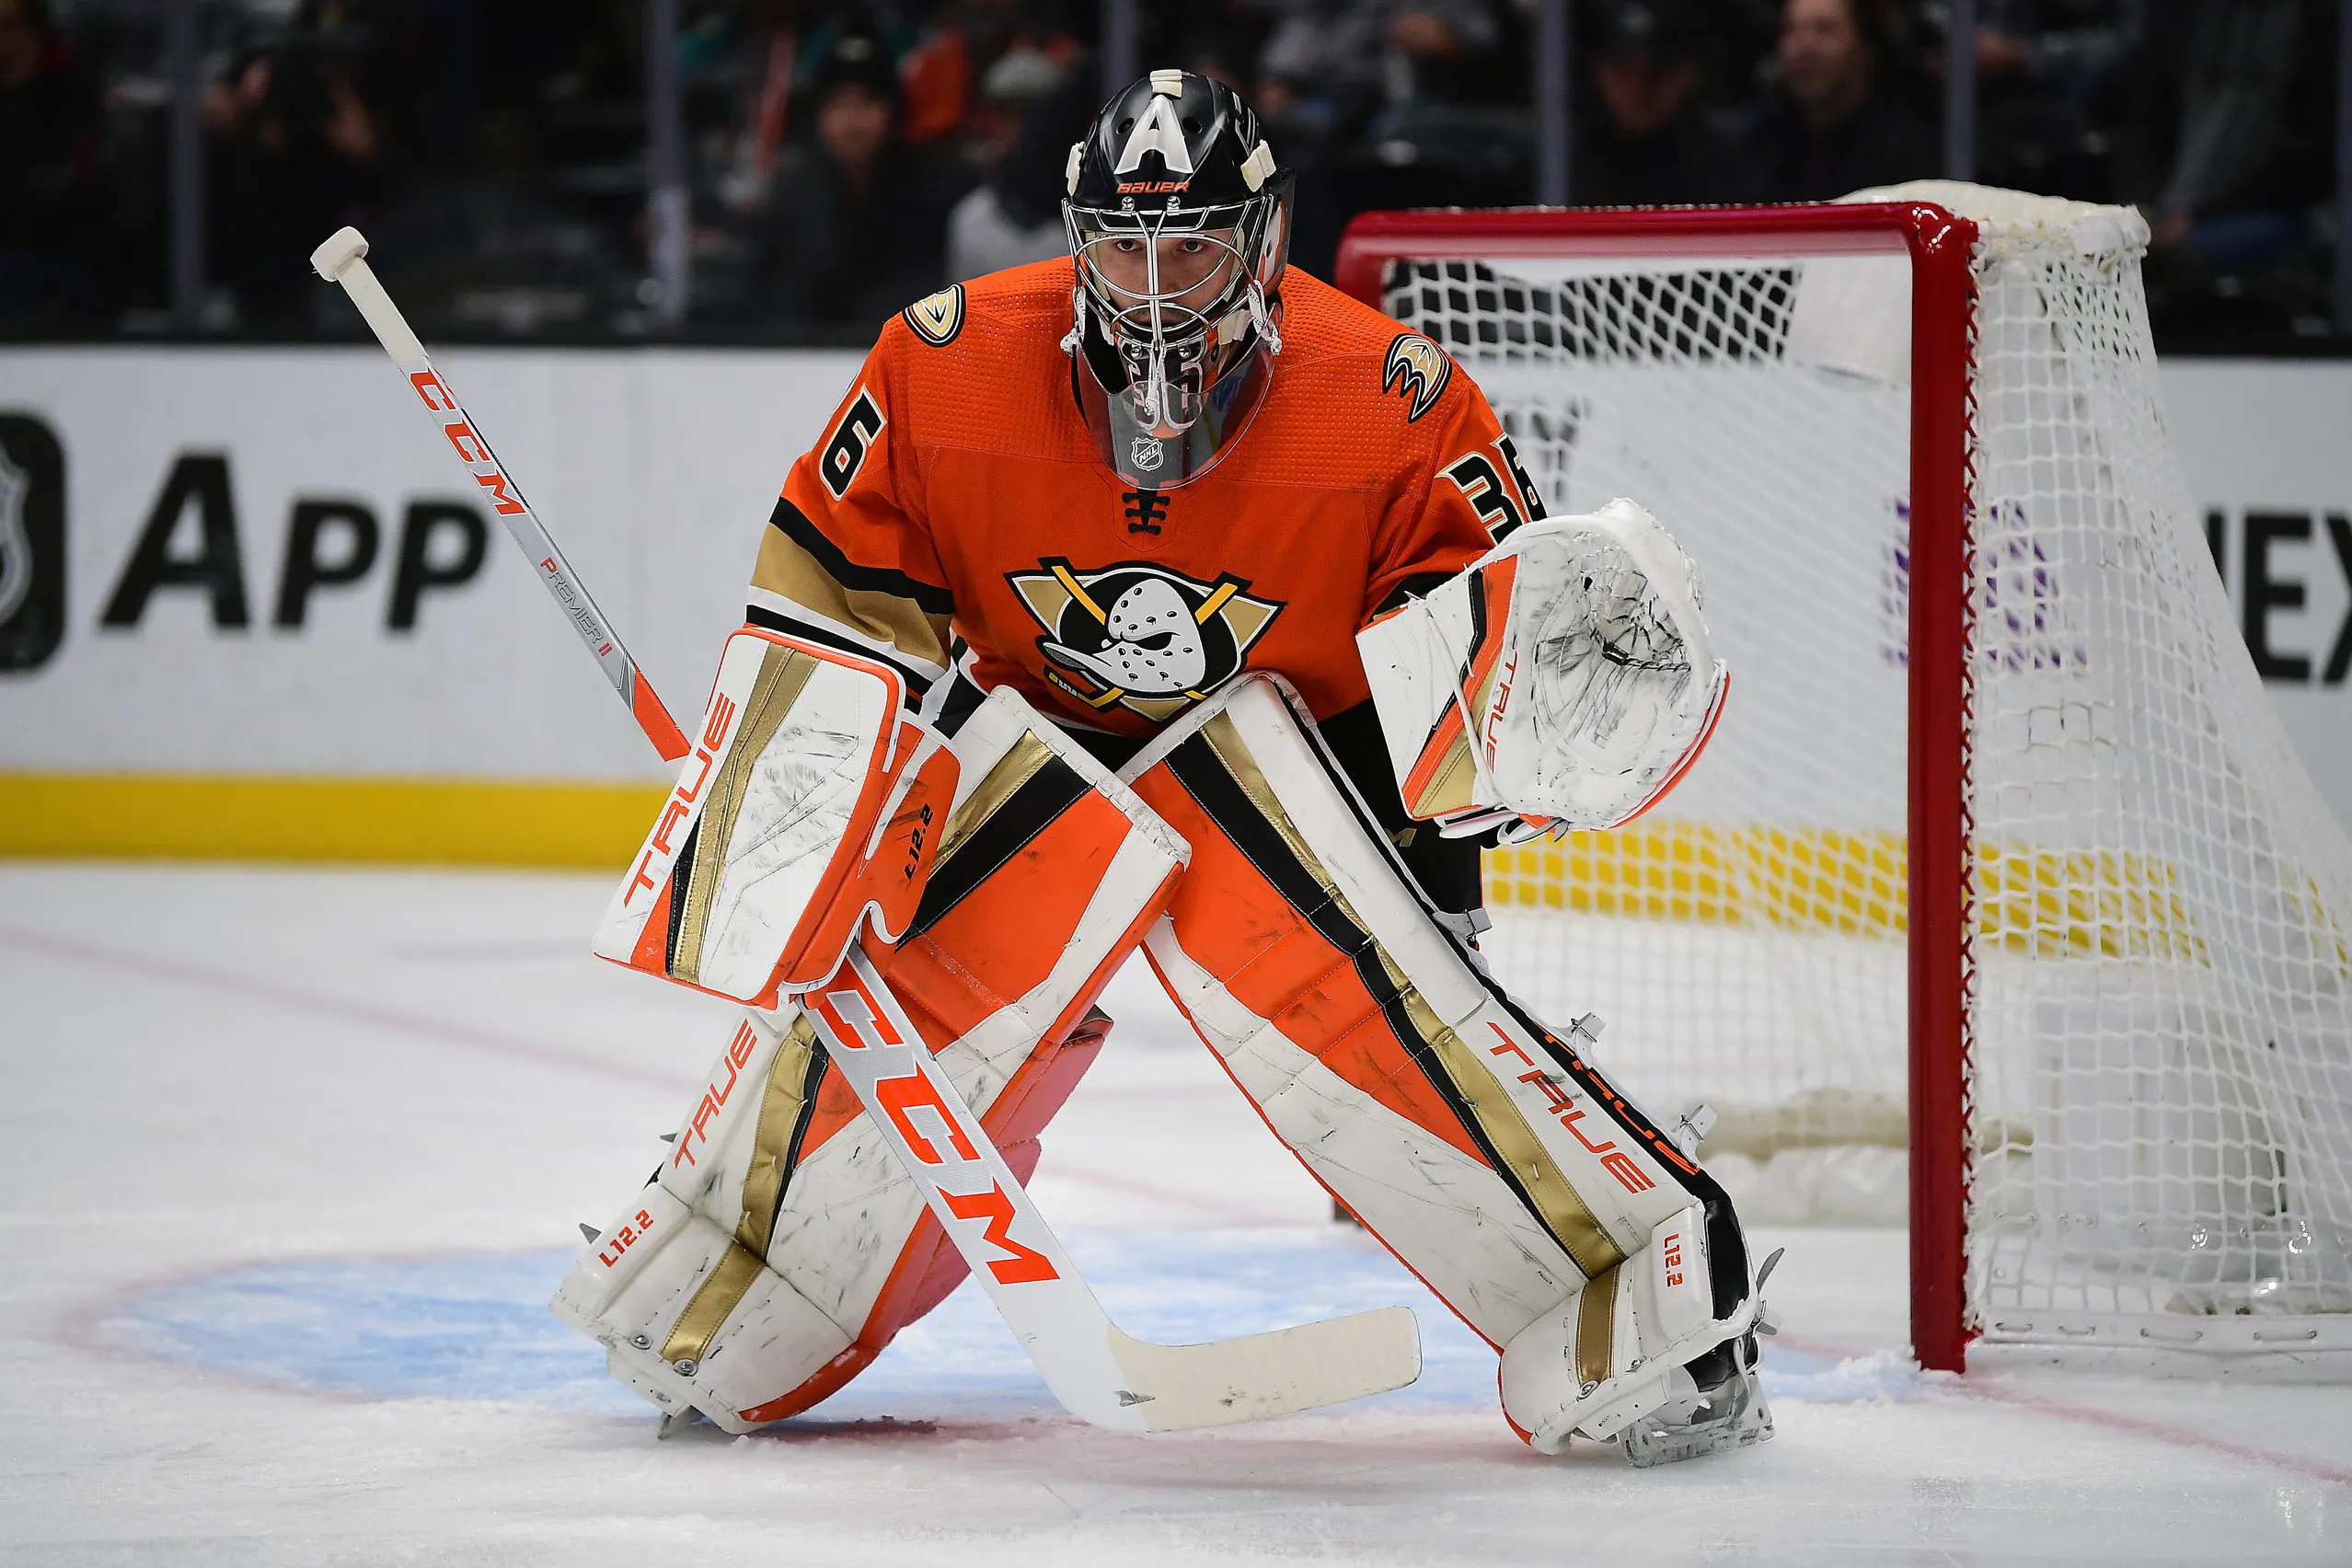 Report: Anaheim Ducks goaltender John Gibson “has absolutely no interest” in playing for the Toronto Maple Leafs